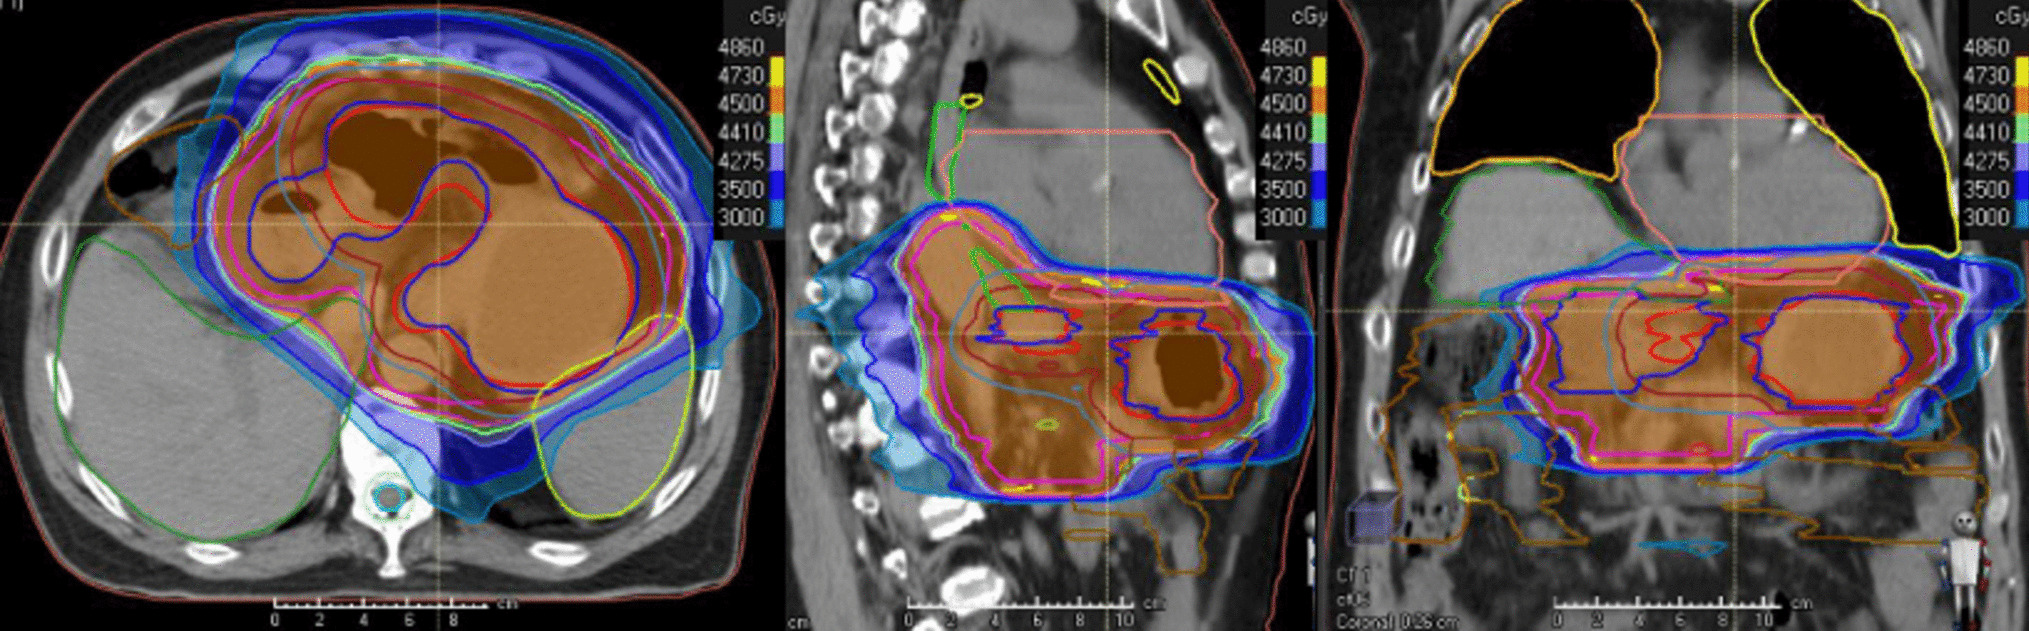 Role of Preoperative Radiation Therapy for Resectable Gastric Cancer